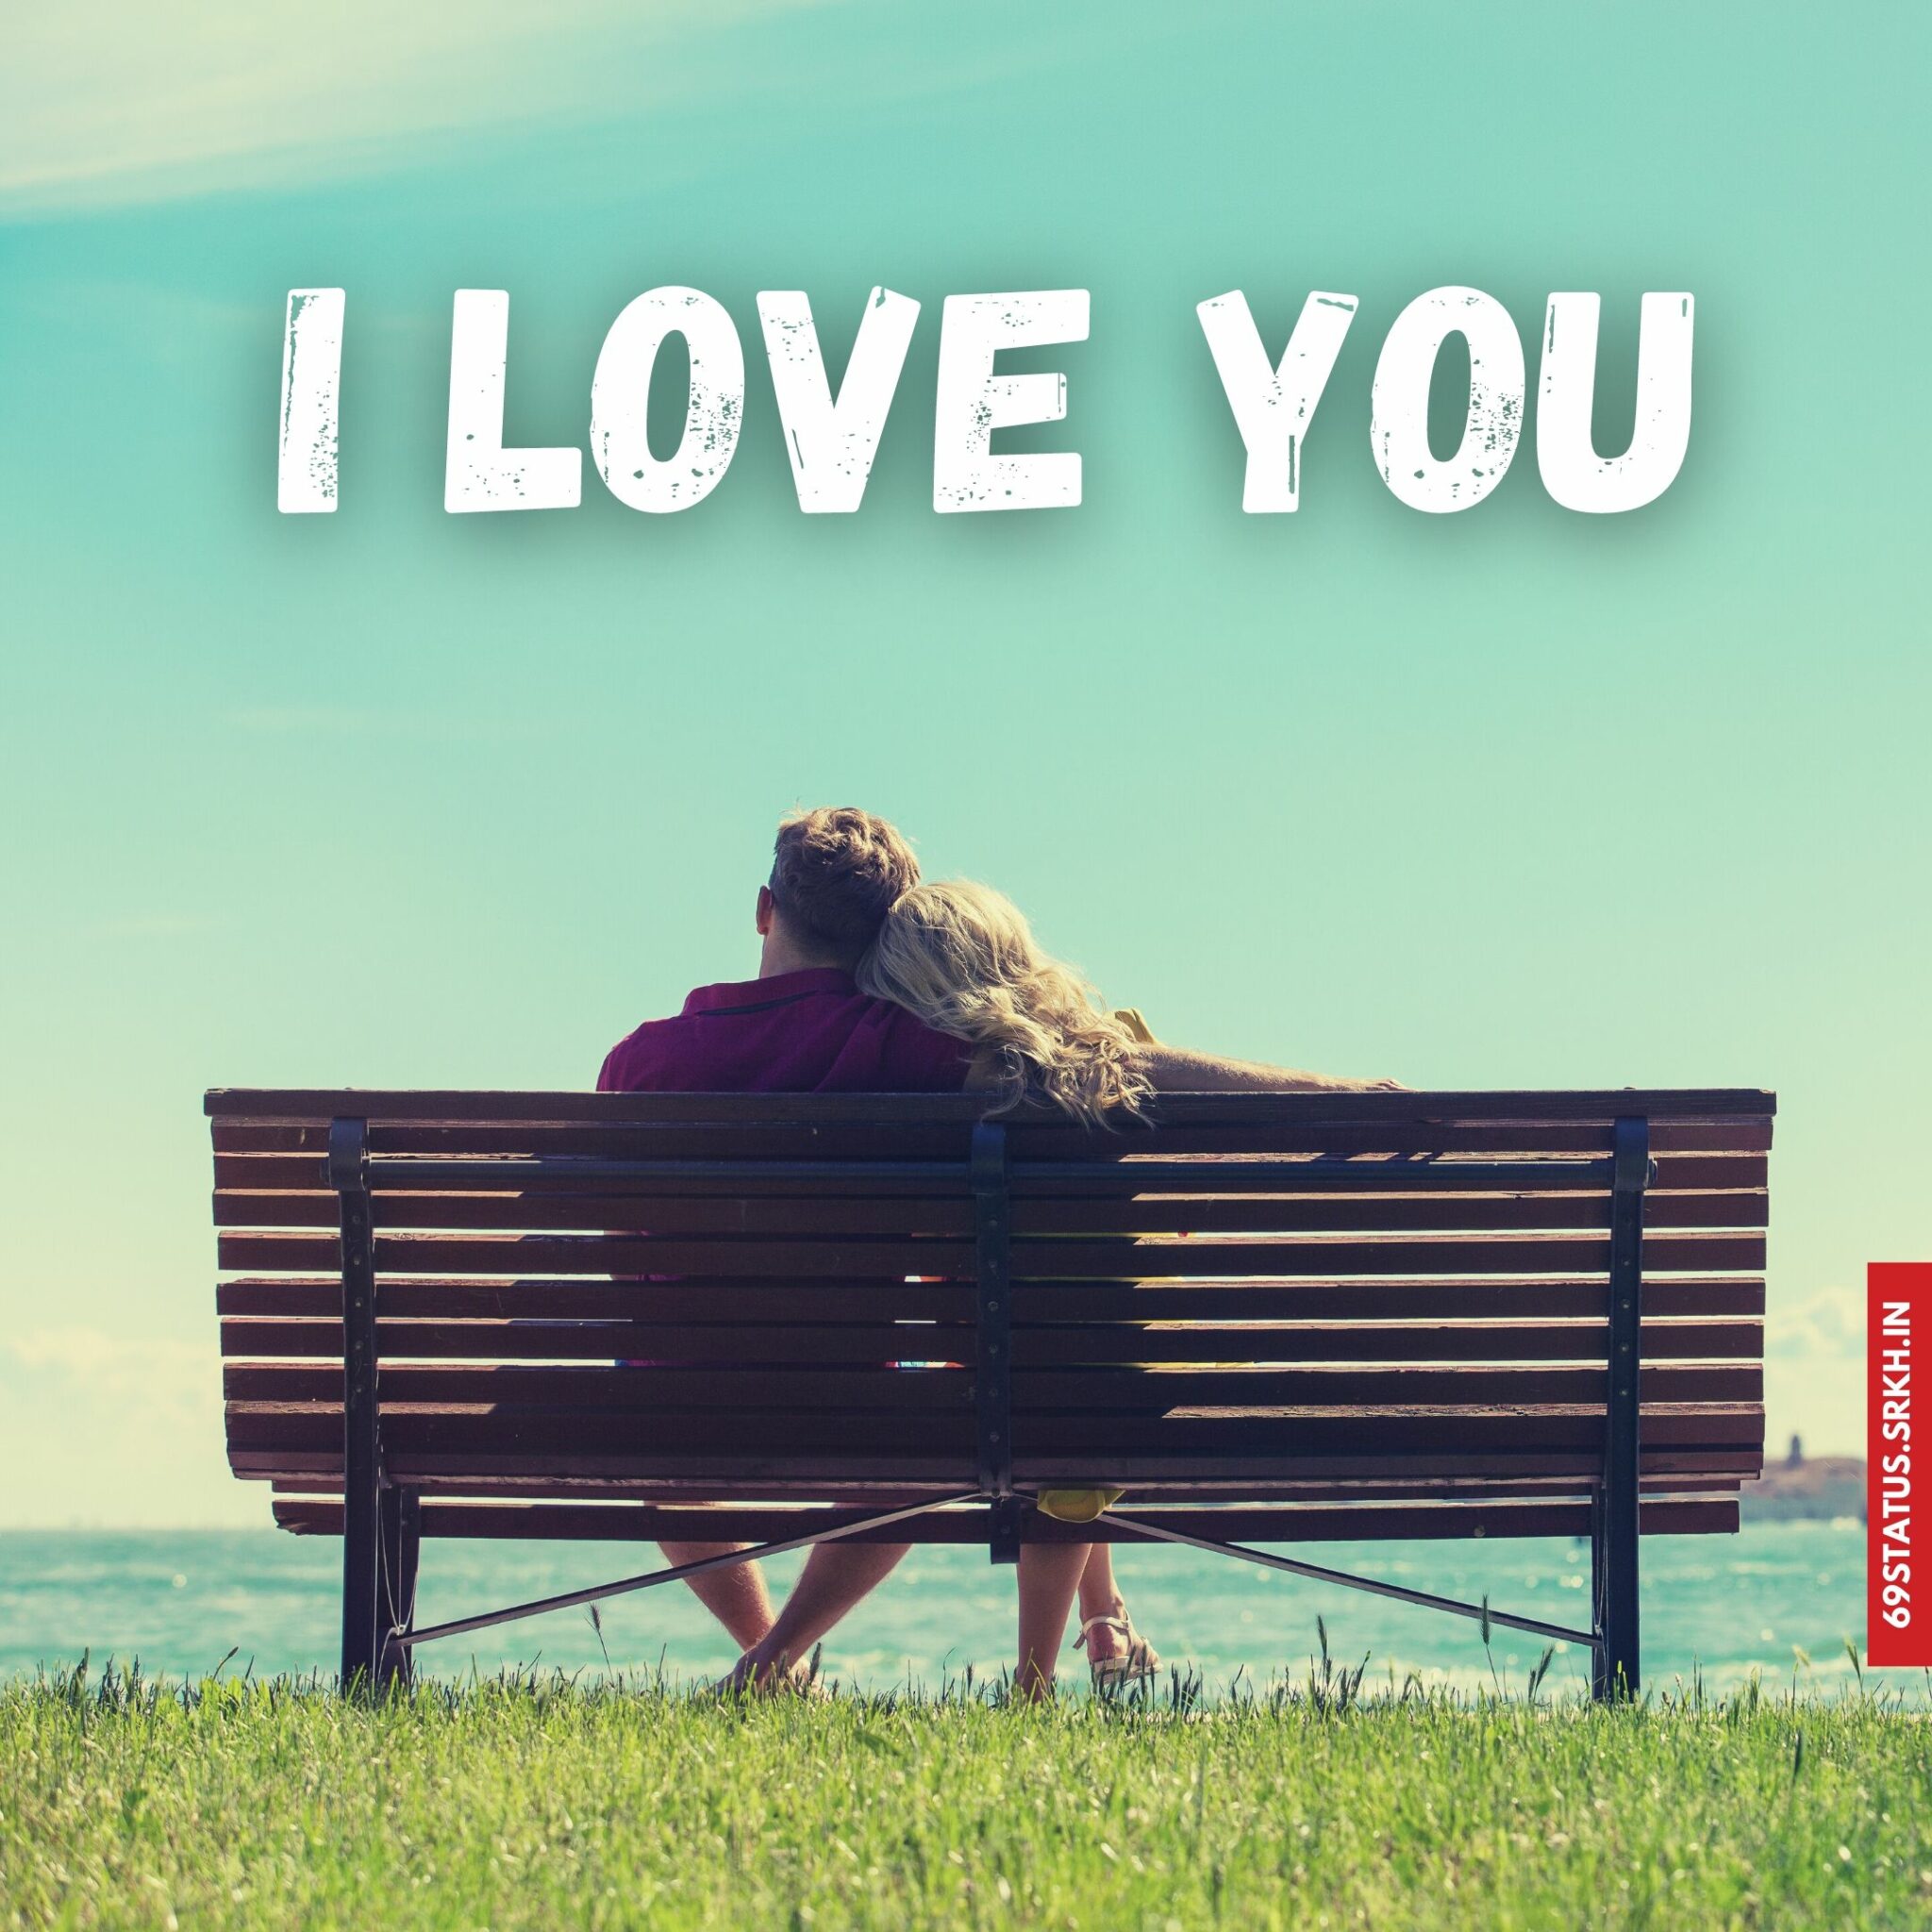 I Love You romantic images